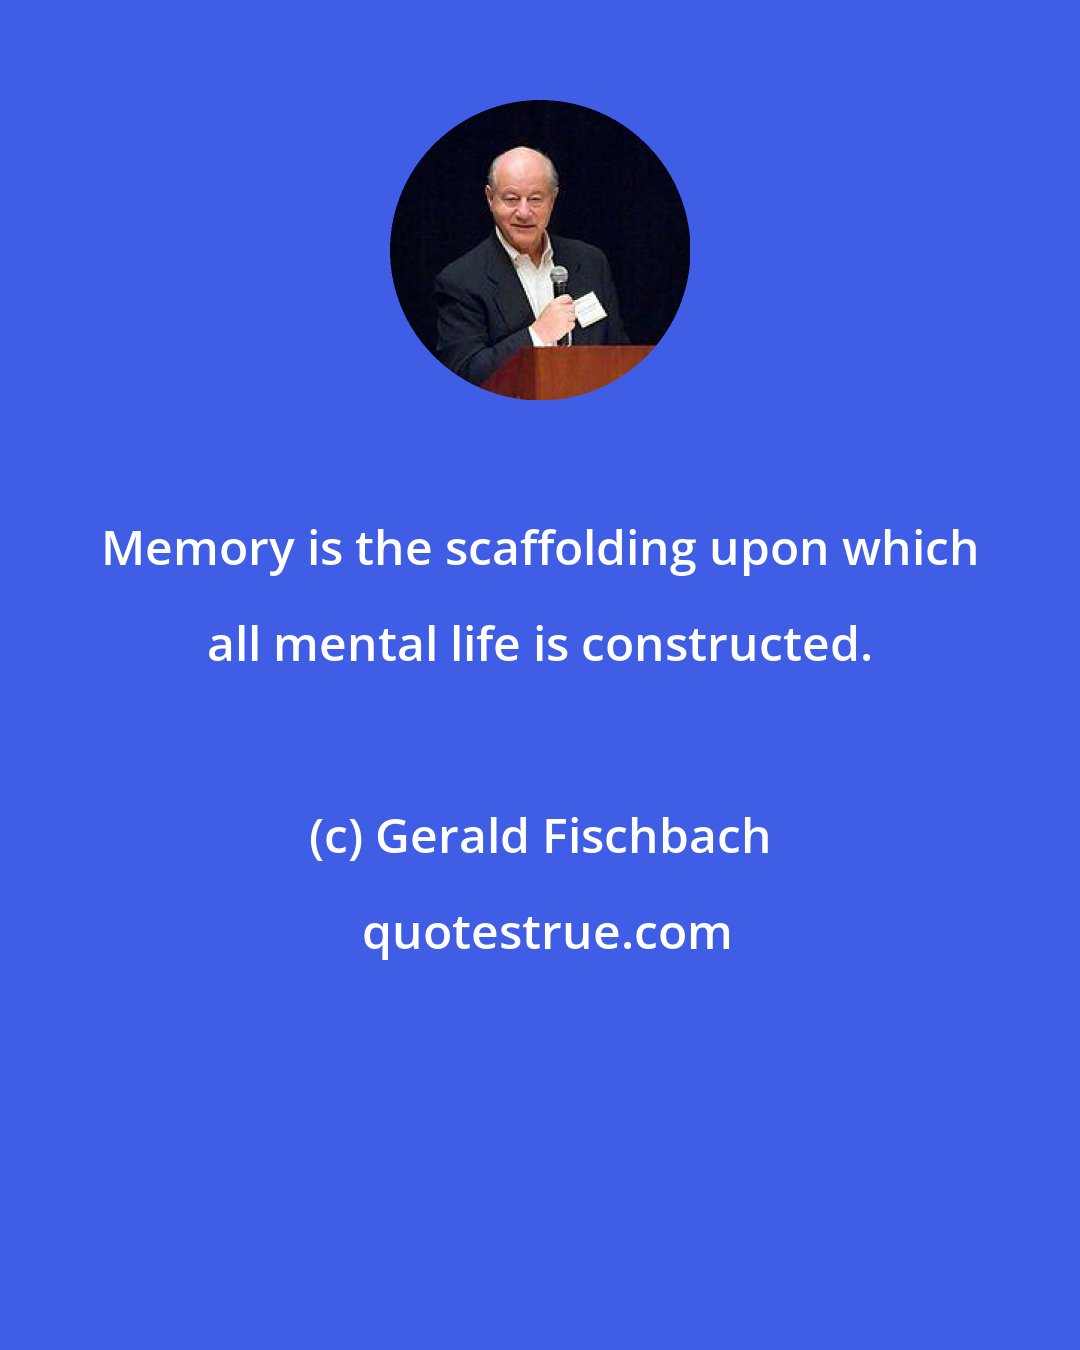 Gerald Fischbach: Memory is the scaffolding upon which all mental life is constructed.